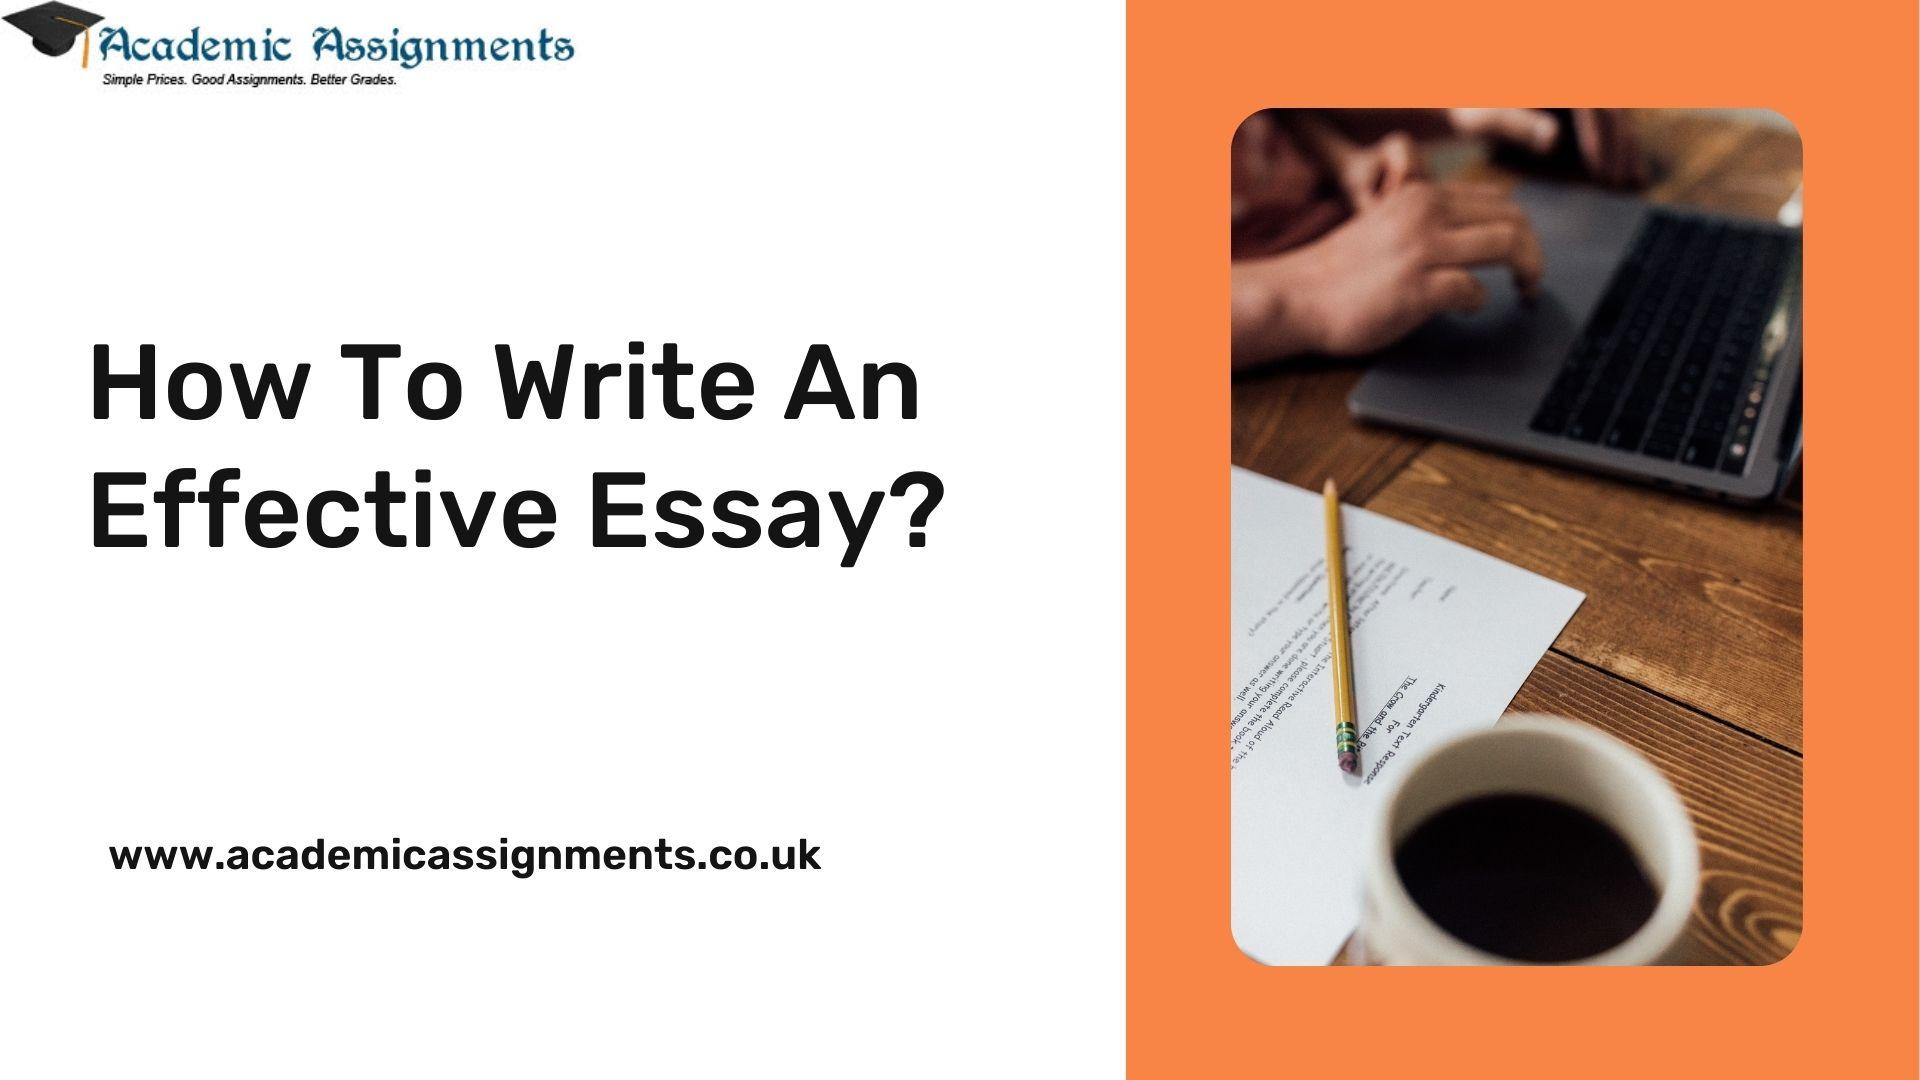 How To Write An Effective Essay?